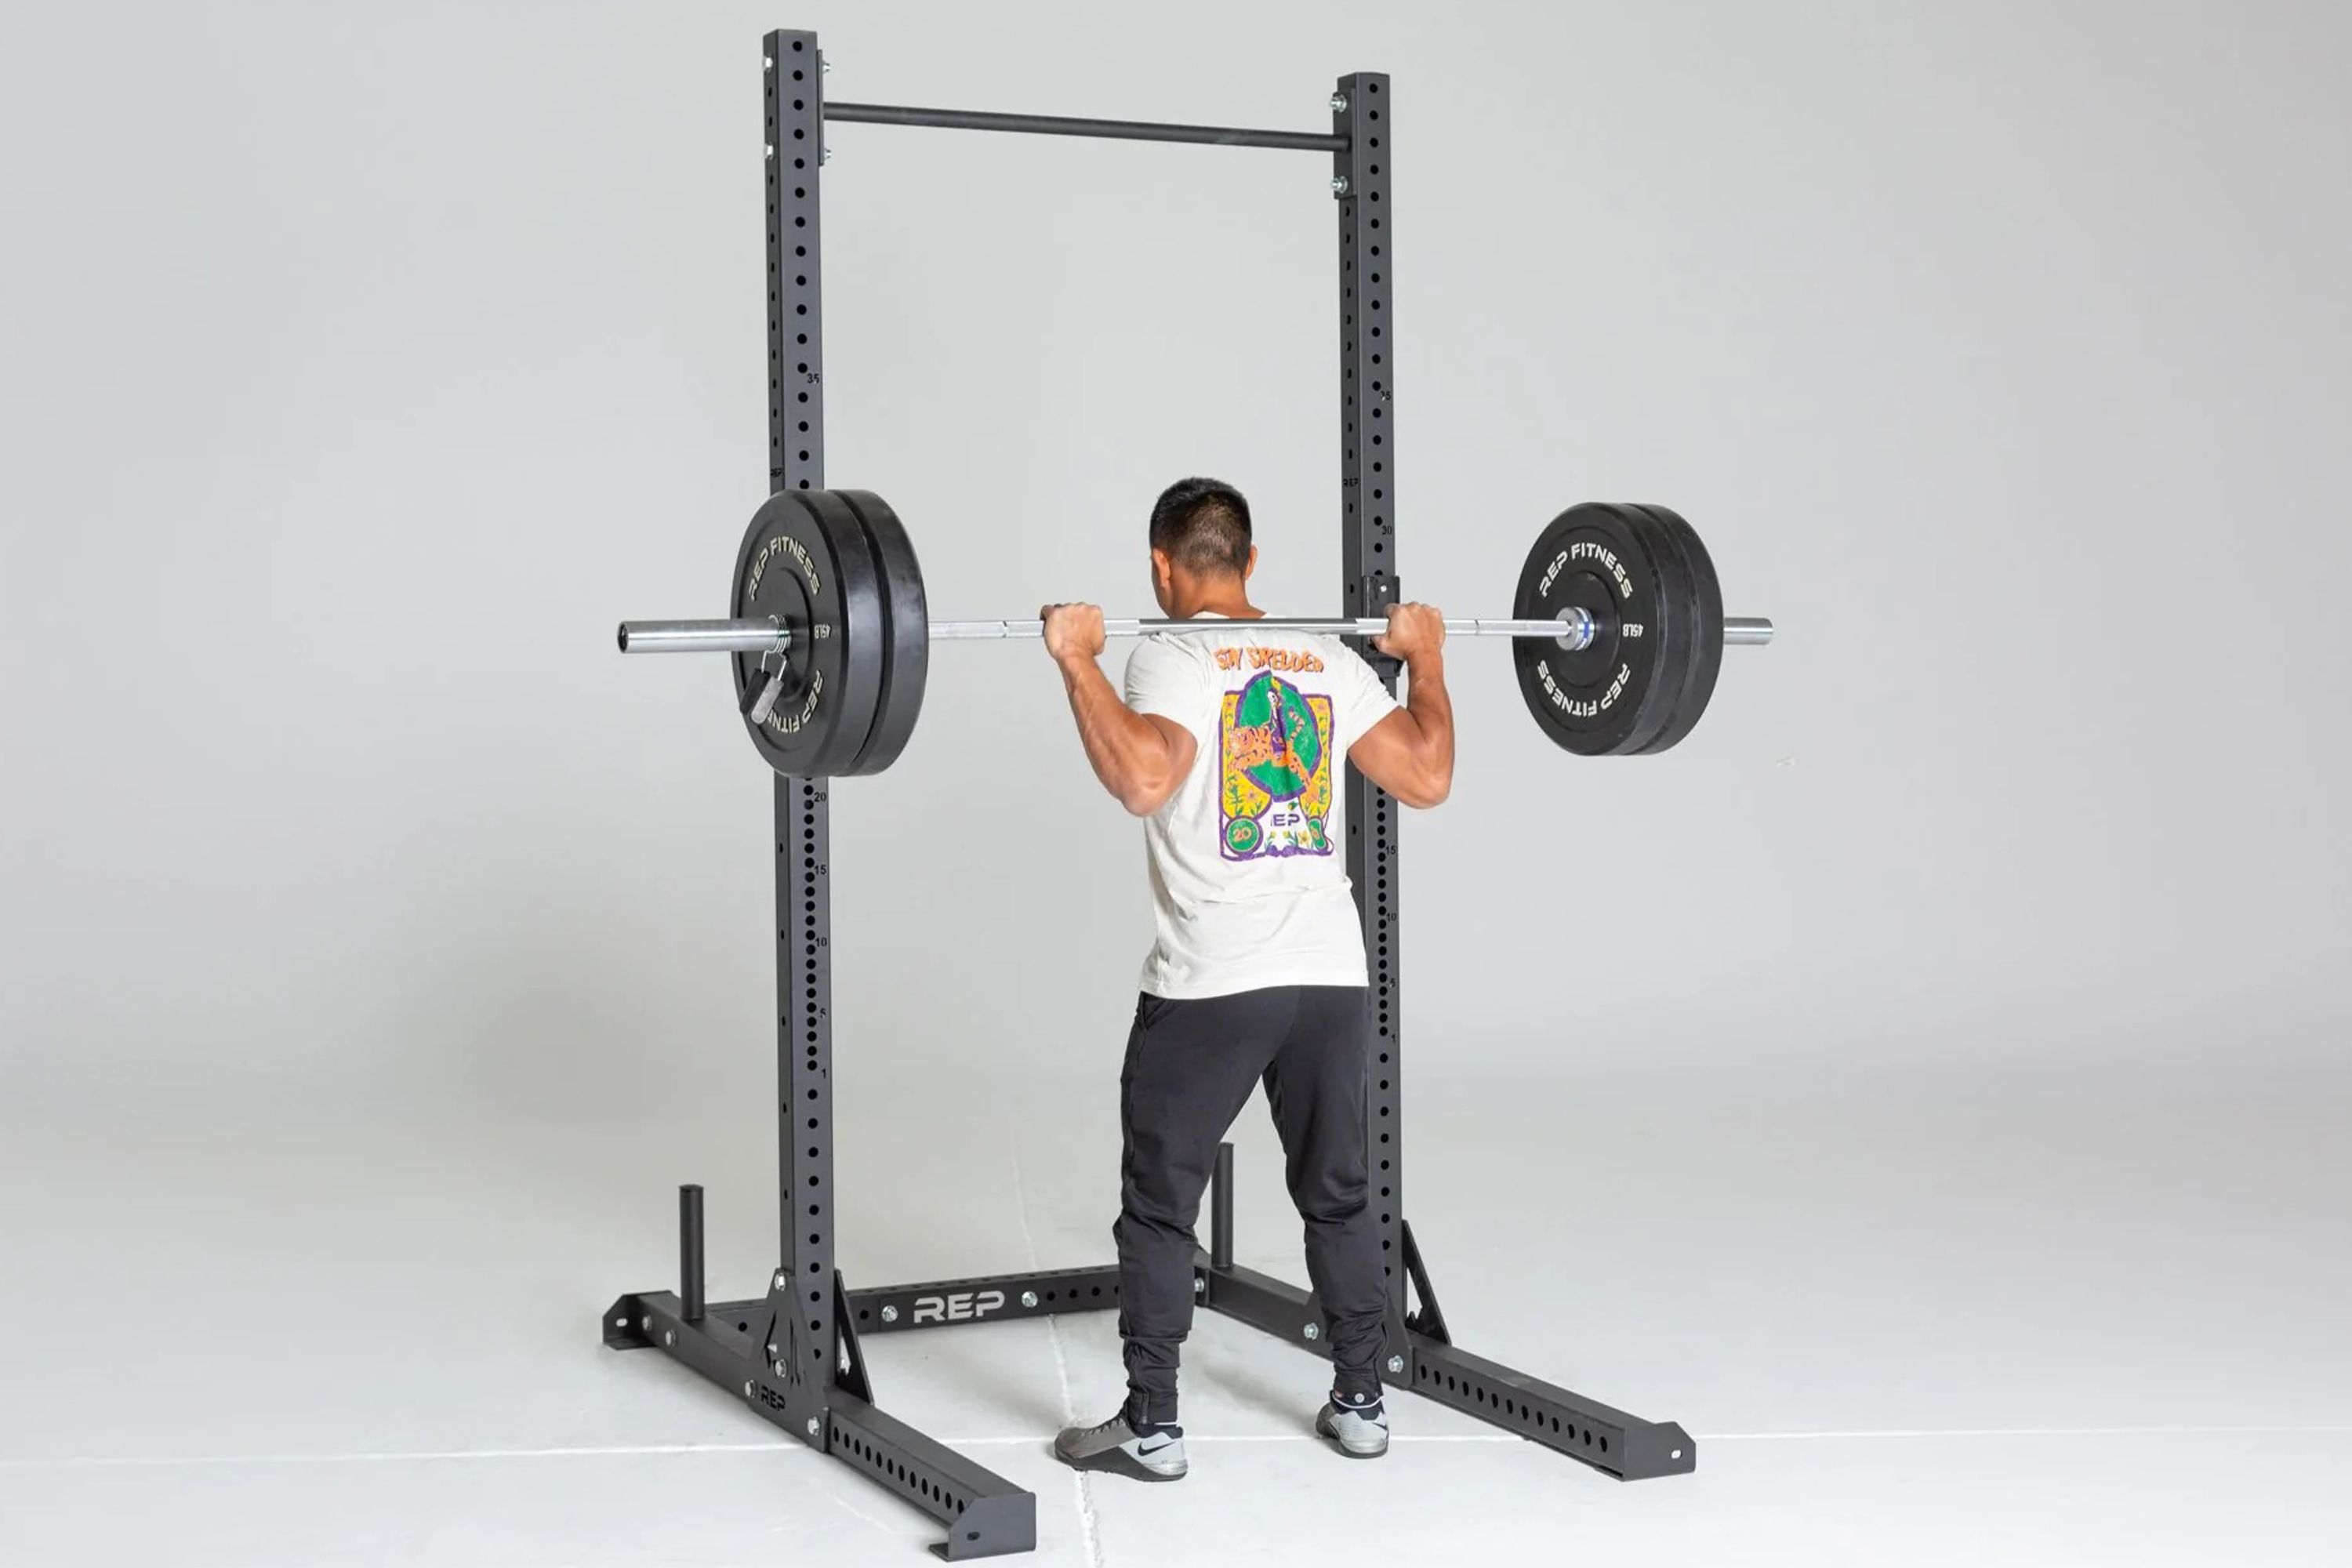 Squat Rack Vs Power Rack: Which Is Best for Your Home Gym?